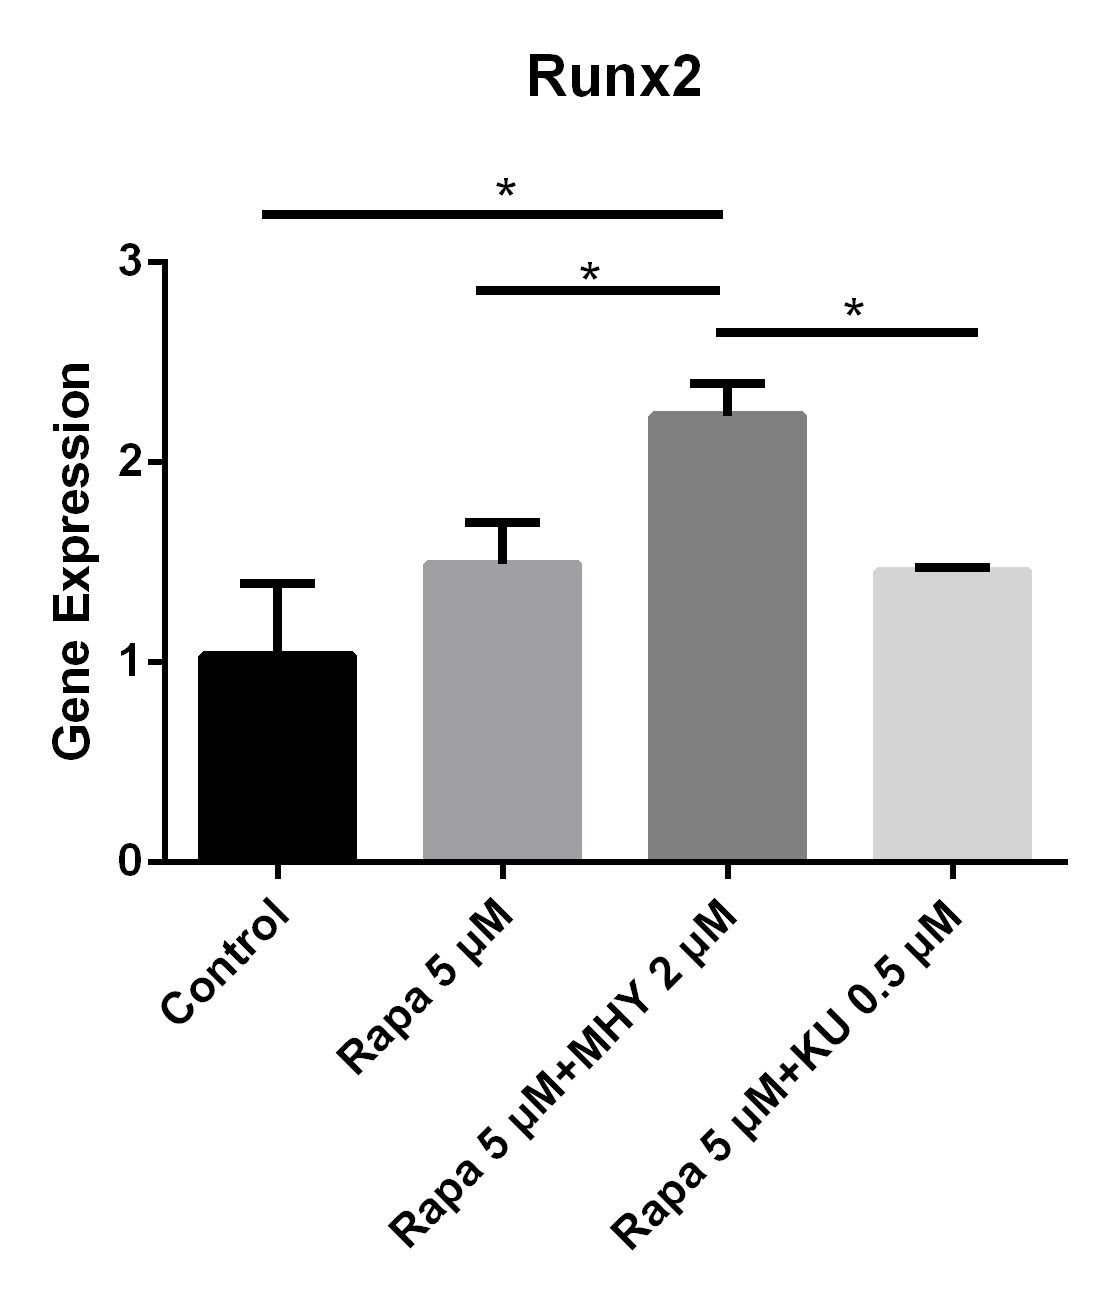 Figure 5 Both blocking mTOR1 or mTOR2 had little effects on the expression of Runx2; however, activation of mTOR2 induced the expression of Runx2